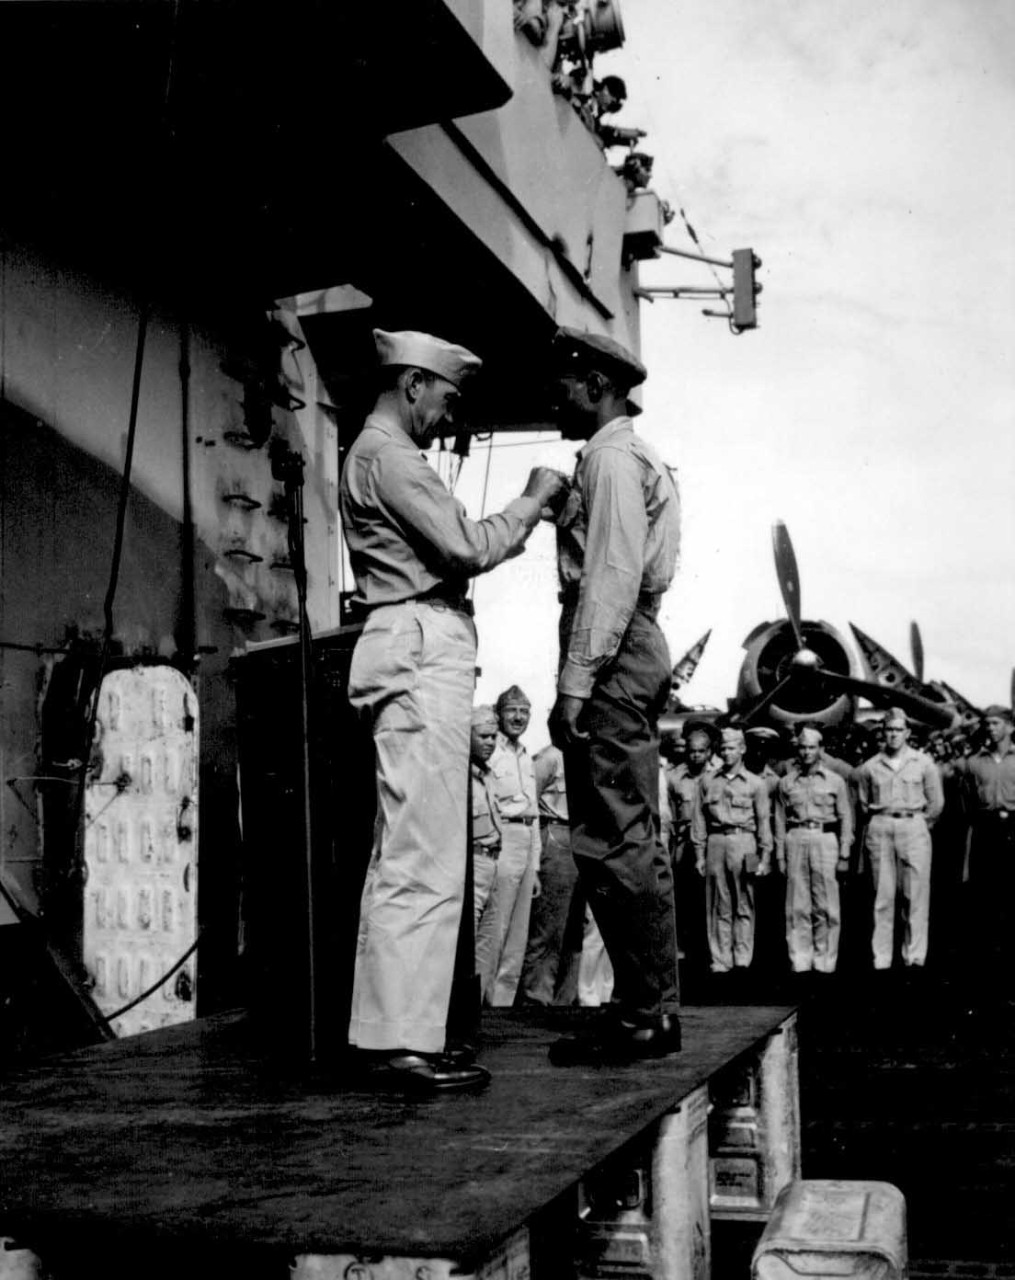 80-G-291220:  Steward's Mate Third Class Fred Magee, Jr., October 1944. Capt. H. W. Taylor making award presentations aboard USS. Cowpens (CVL-25). Fred Magee, Jr., St3/c USN, receiving commendation of the Secretary of the Navy." The commendation was for attempting to rescue, at a risk to his own life, a shipmate from drowning, October 1944.    Official U.S. Navy photograph, now in the collections of the National Archives.   